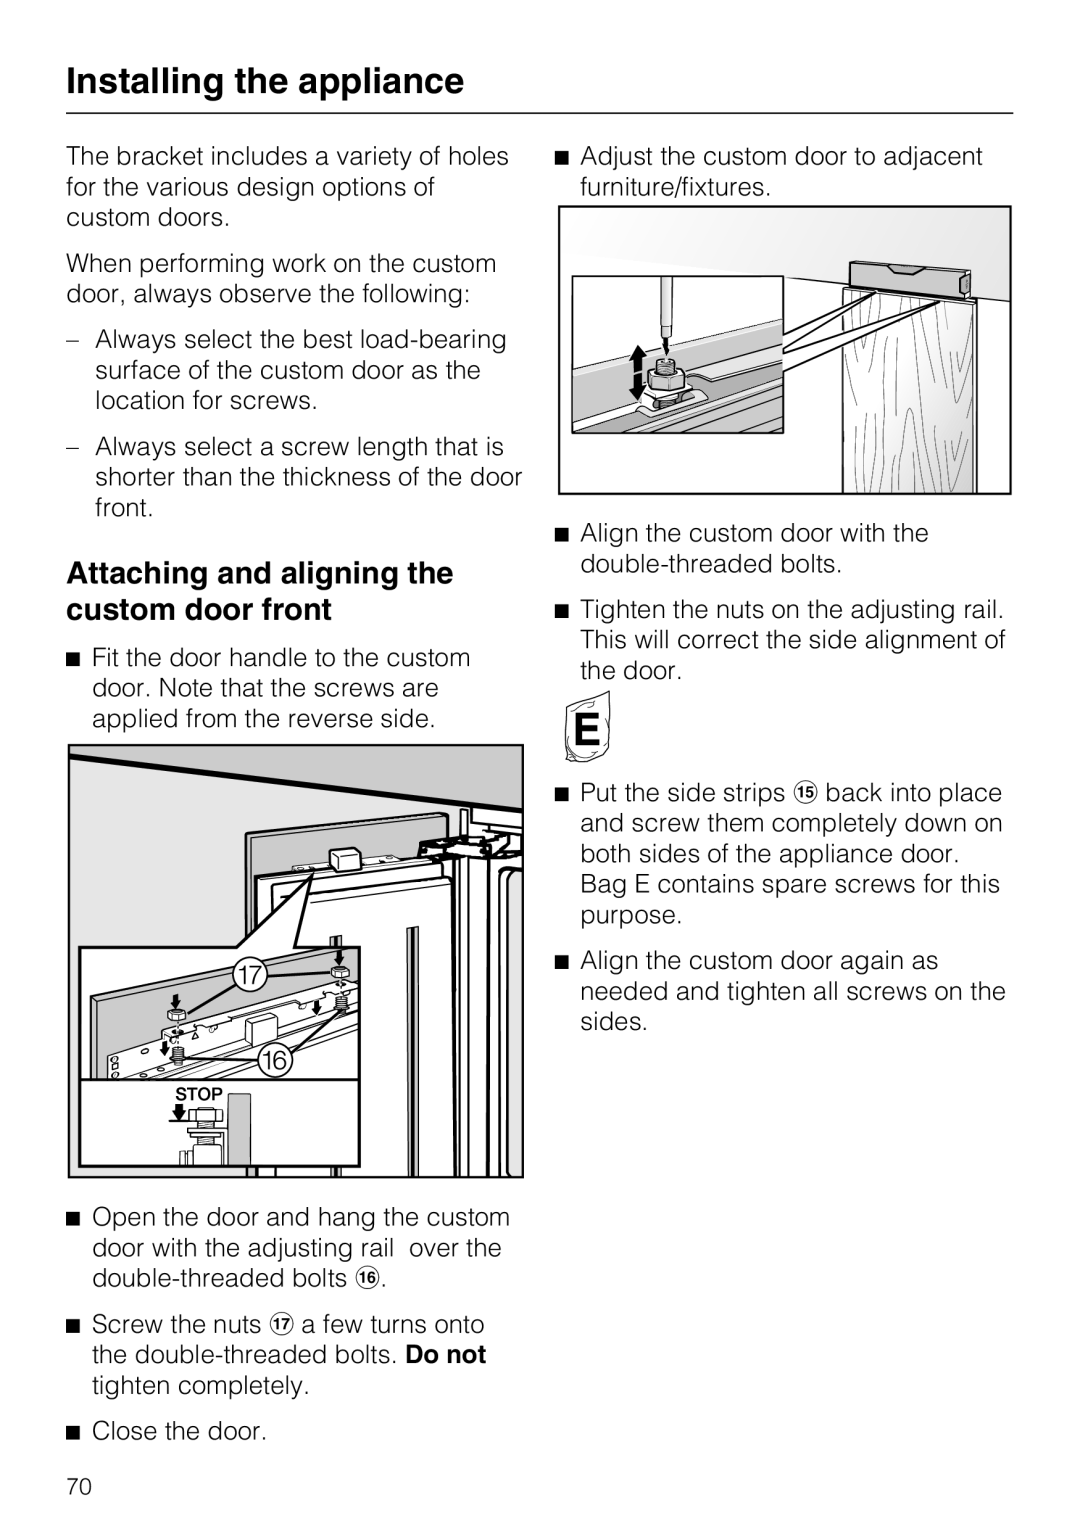 Miele F1471VI installation instructions Attaching and aligning the custom door front, Installing the appliance 